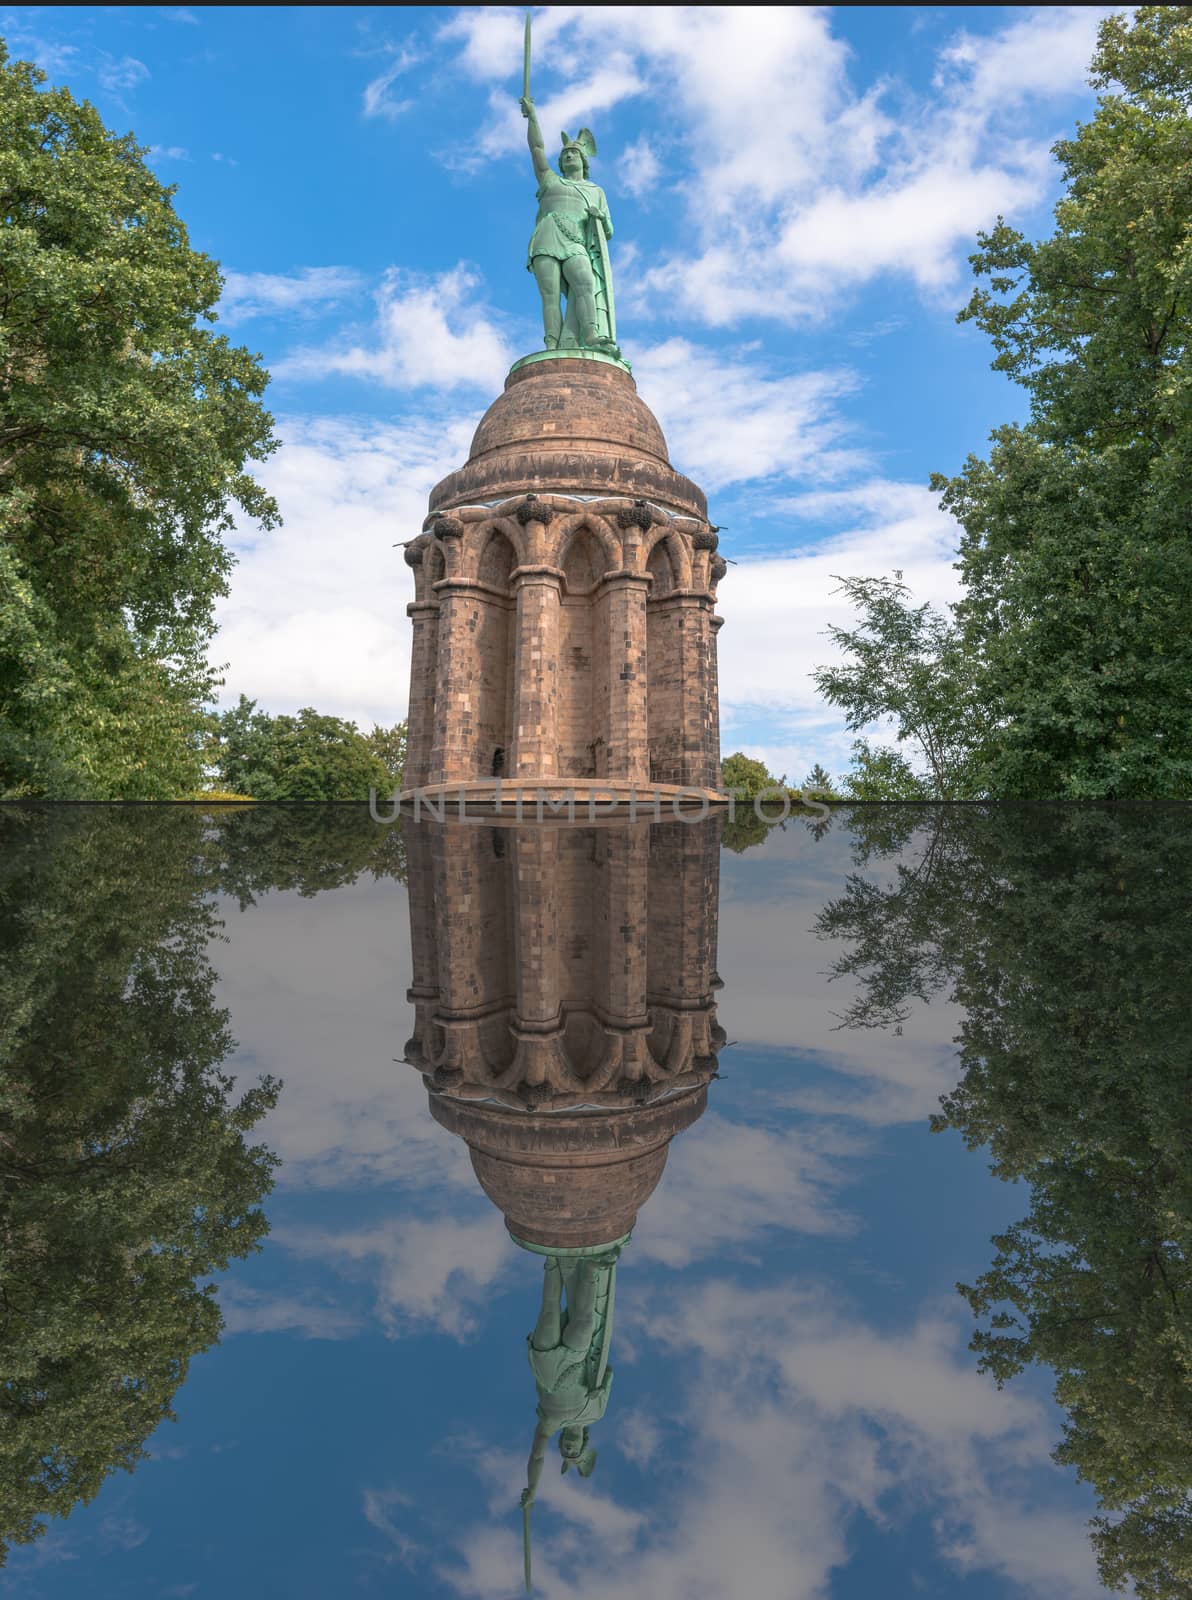 Reflection of the statue of the Cherusque prince Arminius in the Teutoburg Forest near the town of Detmold, Germany.